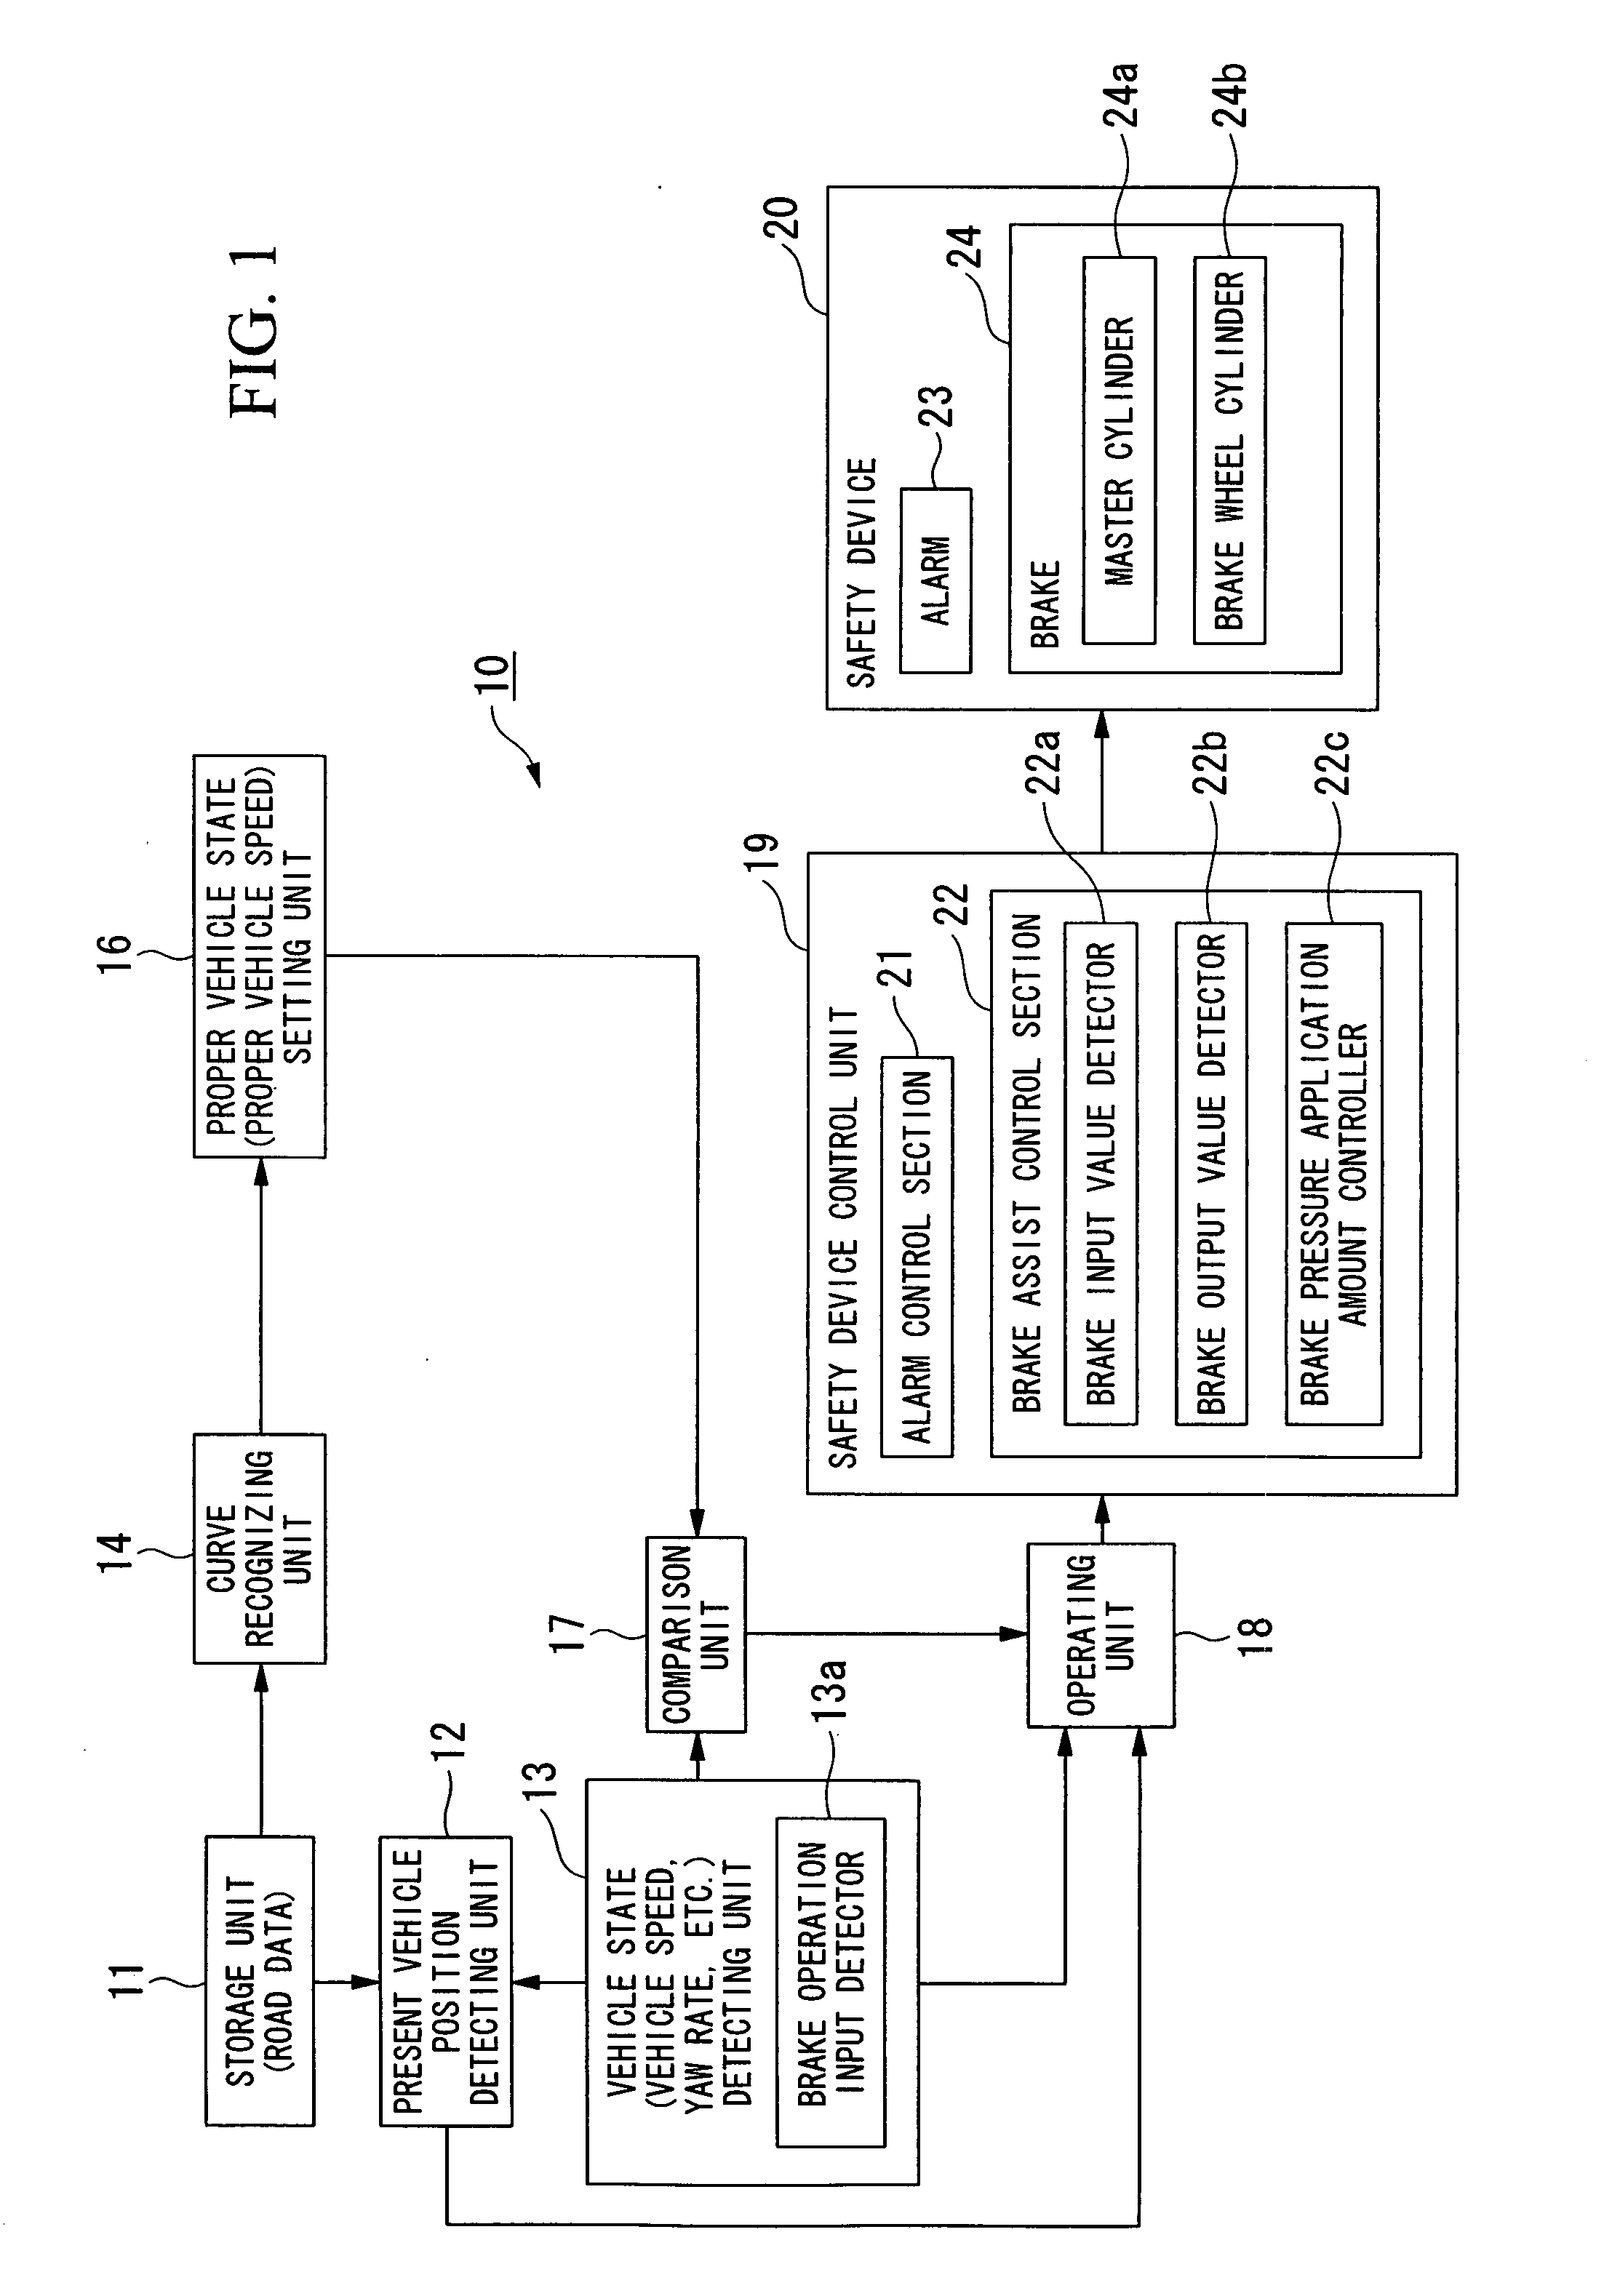 Traveling safety device for vehicle